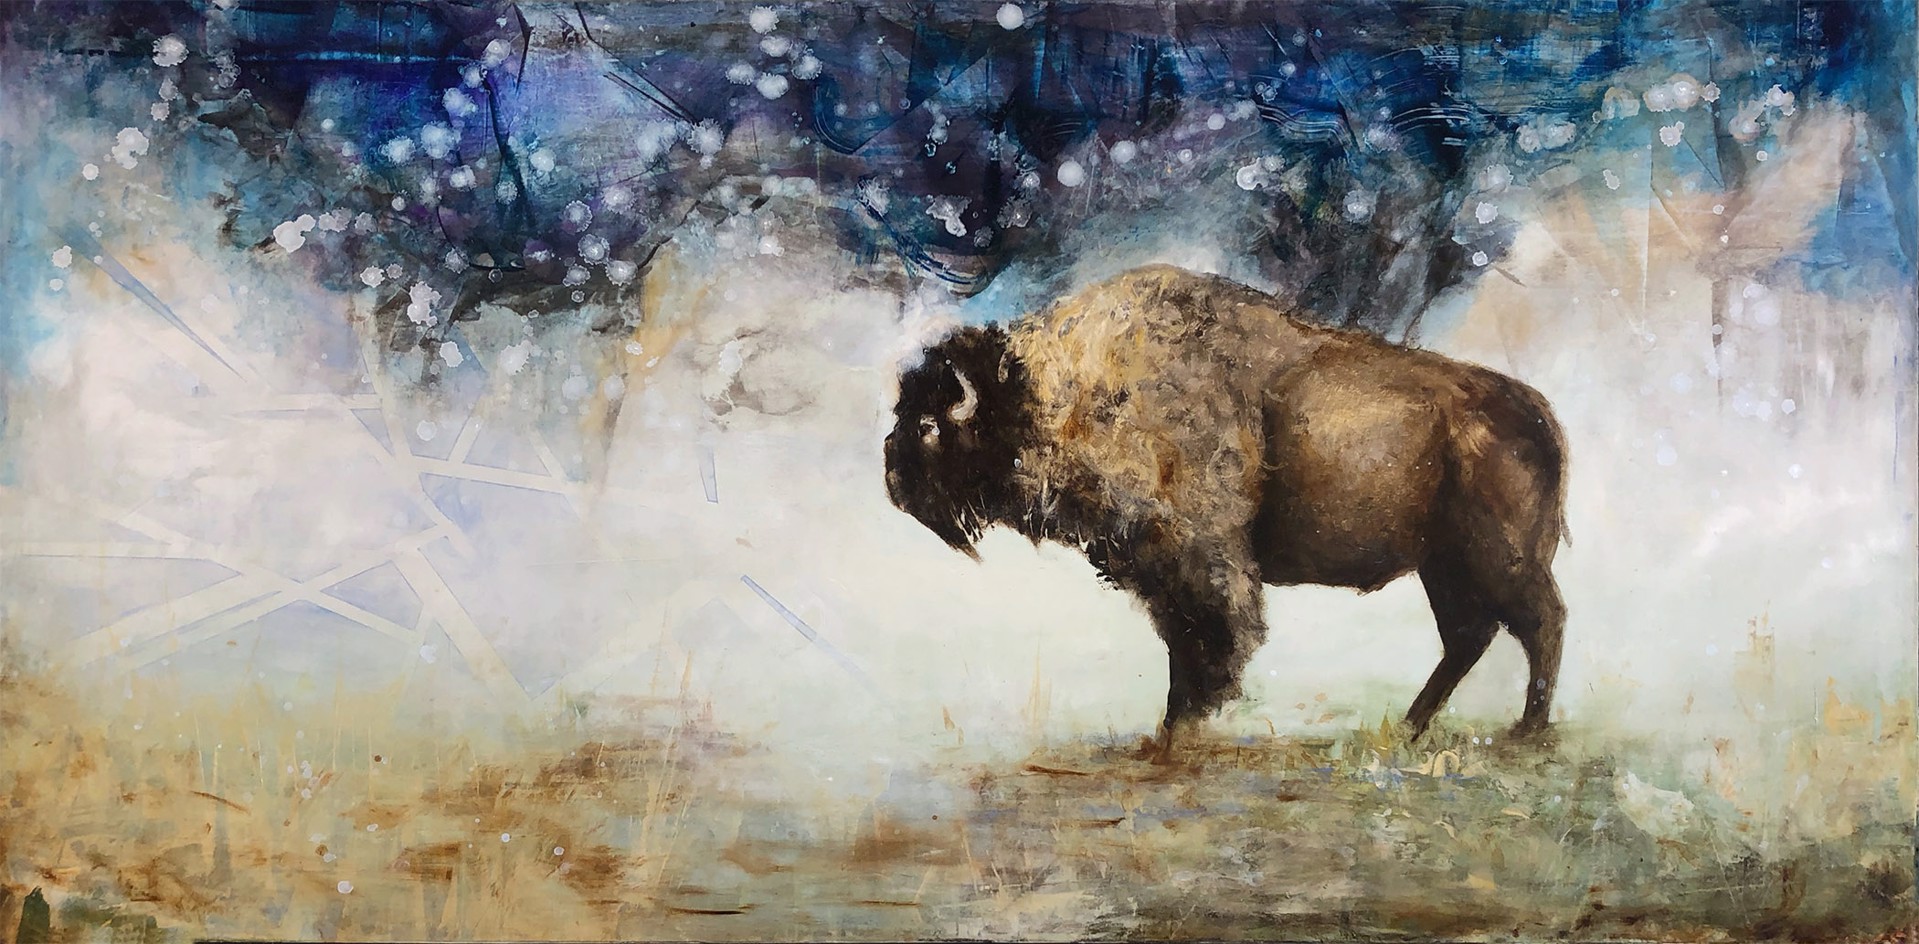 Original Oil Painting Of A Solo Bison With An Abstract Purple Blue Cream Patterned Background, By Patricia Griffin